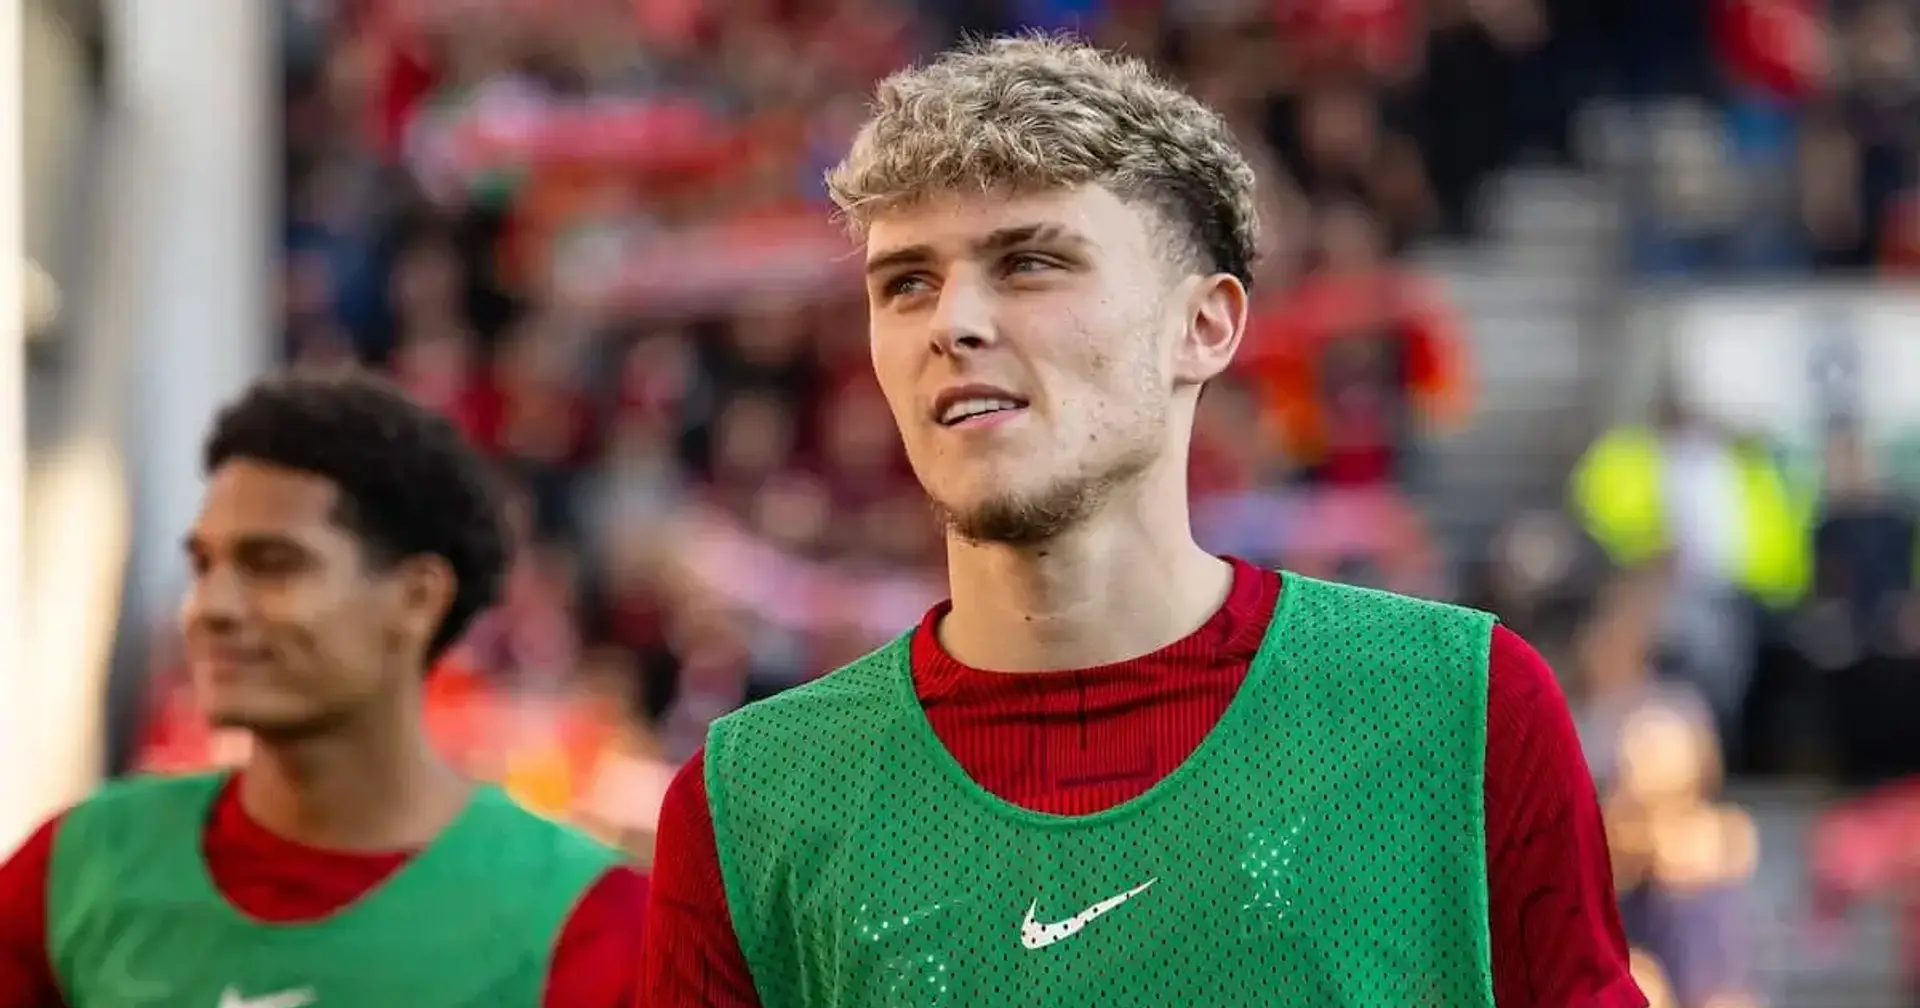 'Regarded as important part of first team': Liverpool to reject any loan move for one teenage player